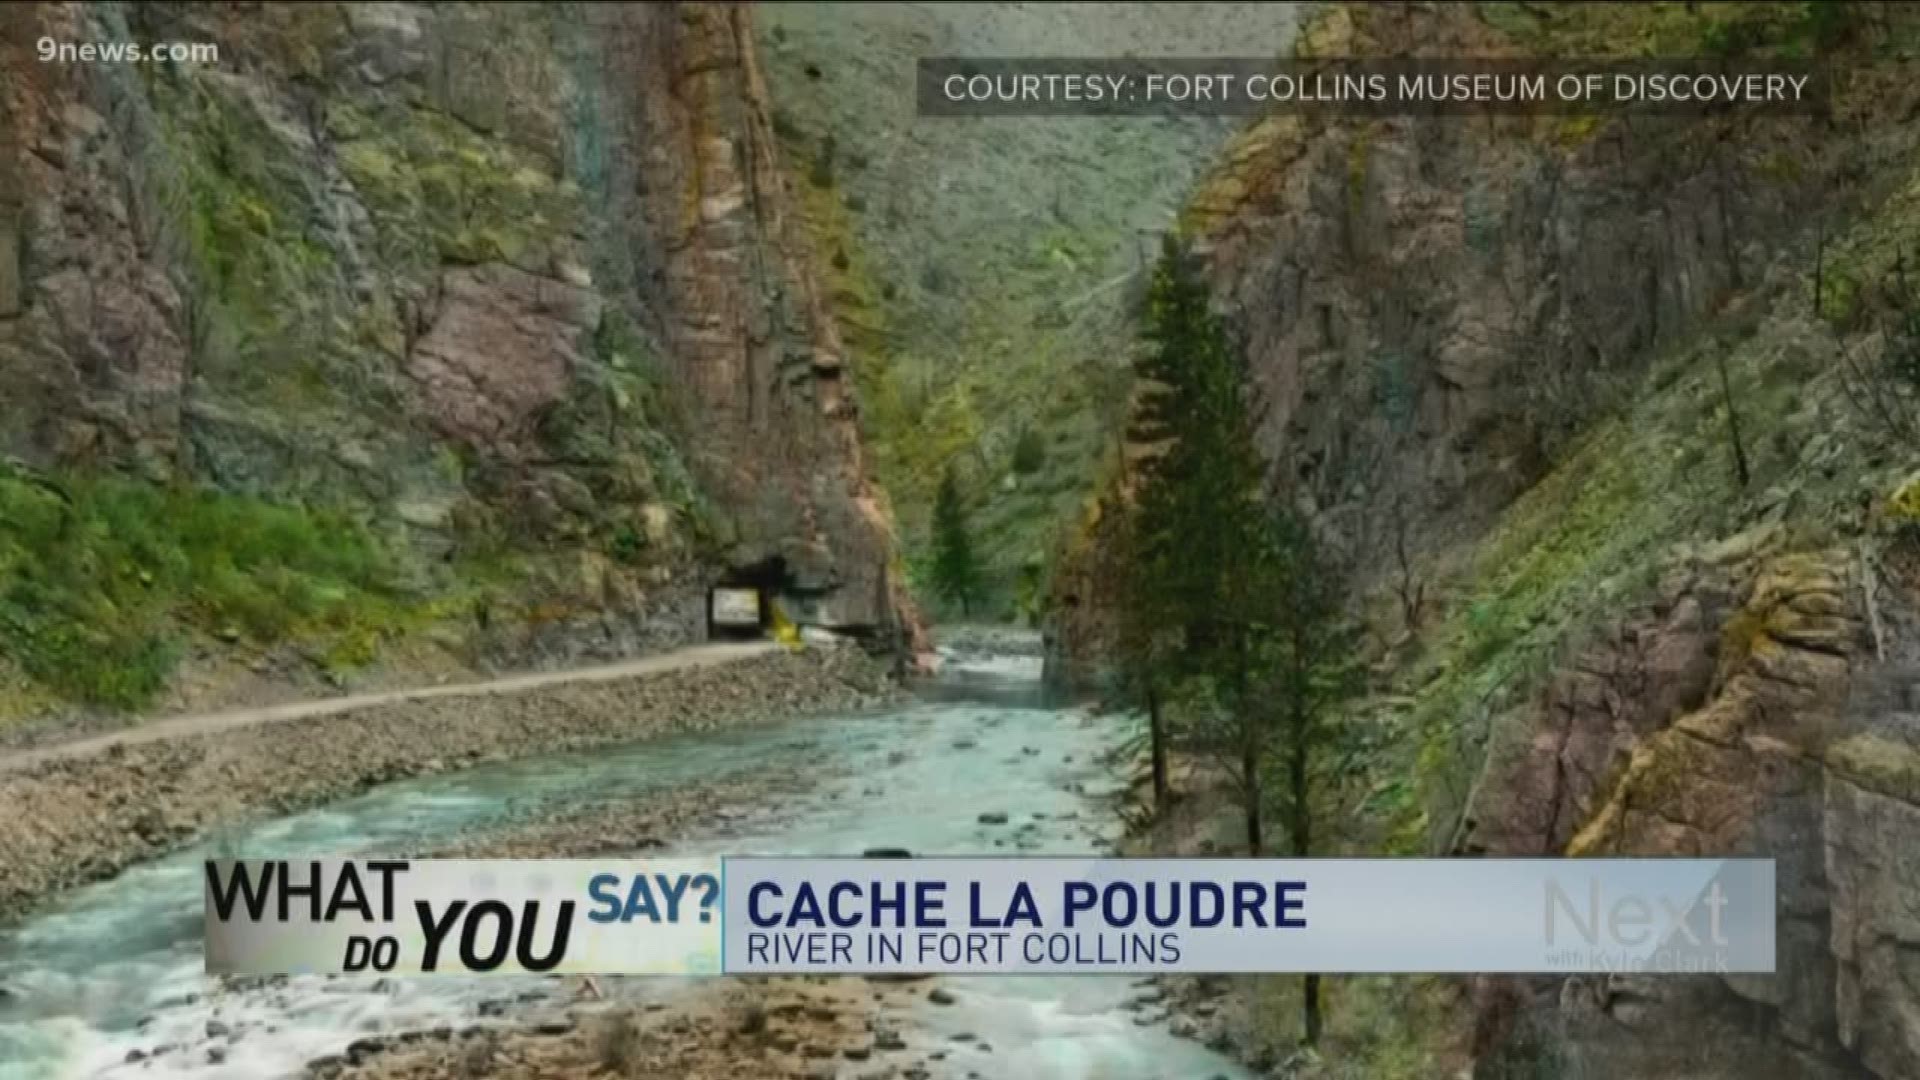 We were hunting for the proper pronunciation of the river that runs through Northern Colorado - the Cache la Poudre.